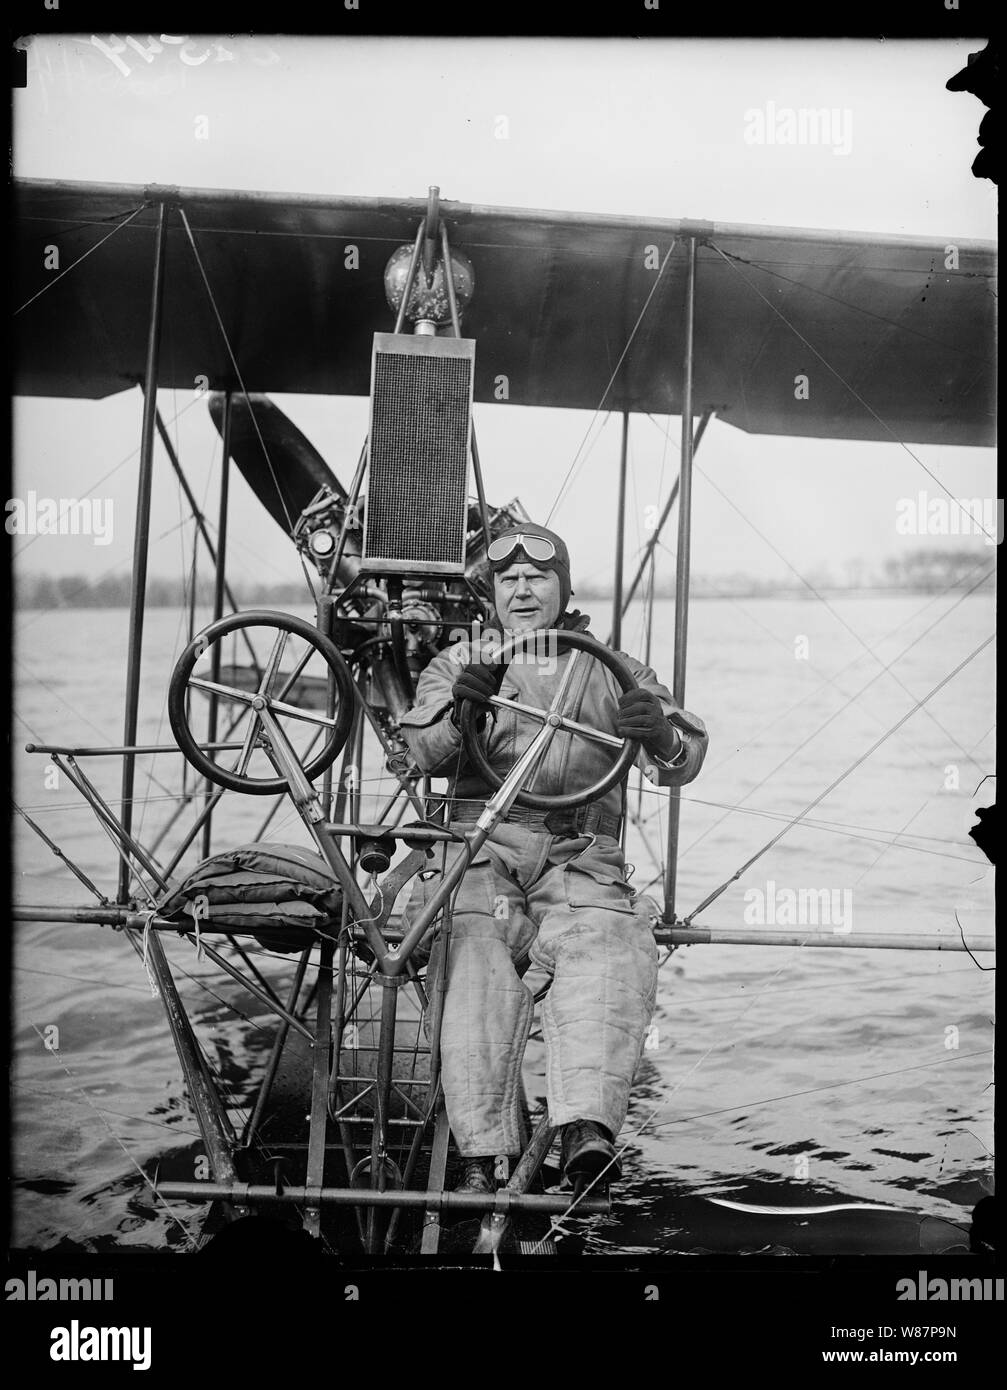 Commander H.C. Richardson, Curtiss seaplane; The good old days of aviation. Commander H.C. Richardson, crack U.S. Navy flyer, at the controls of a 1915 model Curtiss seaplane which he took on its maiden flight today on the Potomac at Washington. The old plane was discovered in storage at the Washington Navy Yard where it has been for over 12 years. Commander Richardson is testing the old boat to compare its behavior to that of craft of modern construction Stock Photo